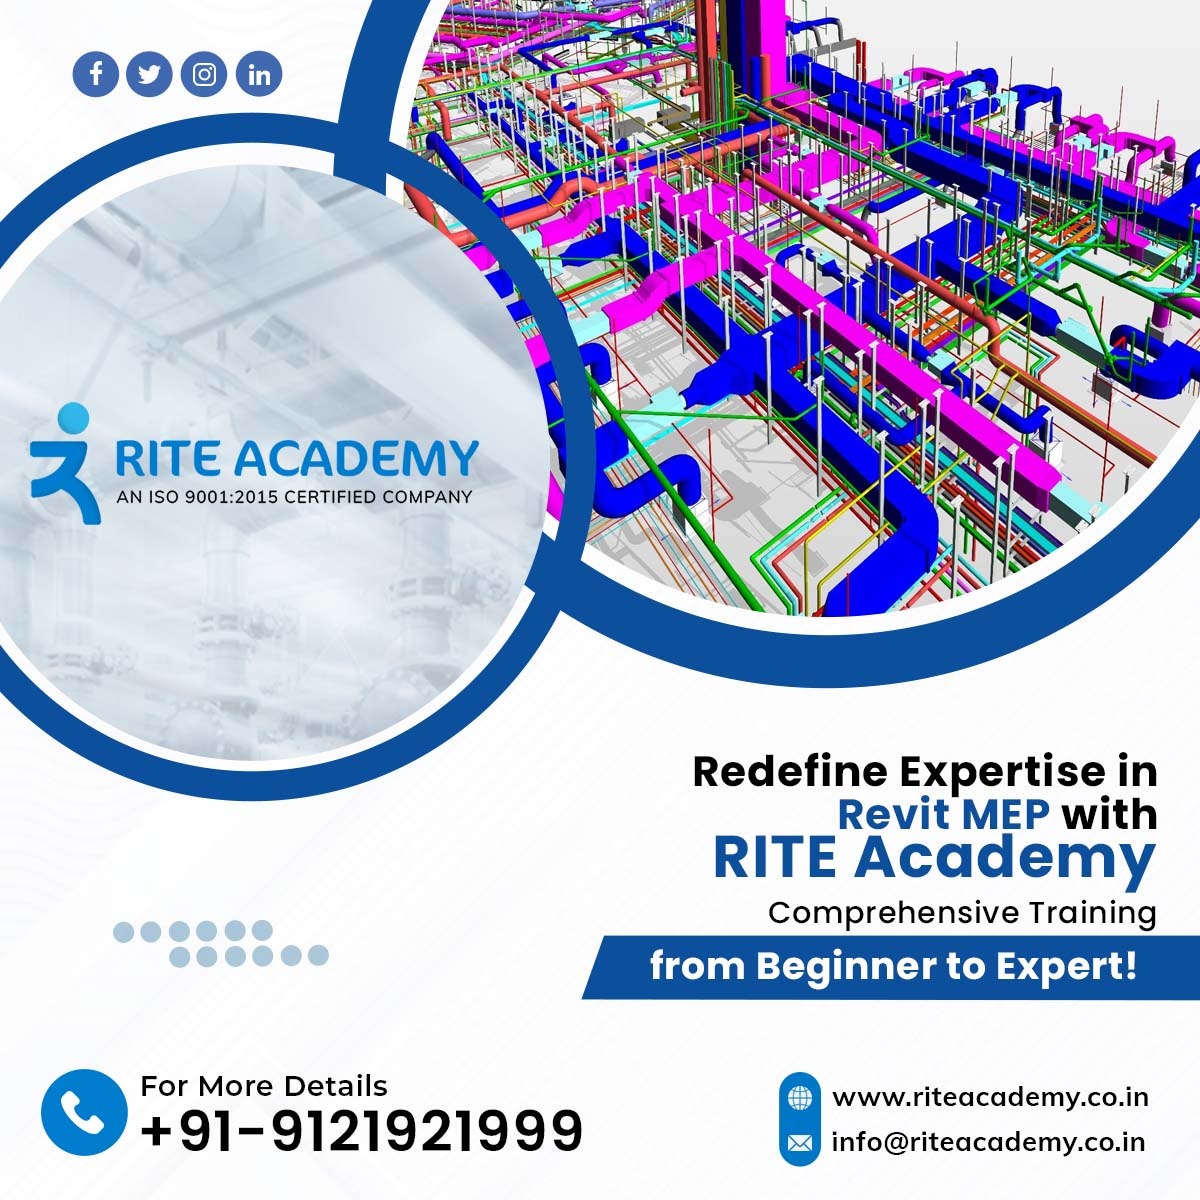 Level up your MEP skills with #RevitMEP #Training in Hyderabad at RITE Academy. 🔧✨

Contact us today to learn more about our comprehensive #courses. 🏗

Visit our website to secure your reservation or give us a call for the #MEPcourse in #Hyderabad.

#riteacademy#MEPtraining